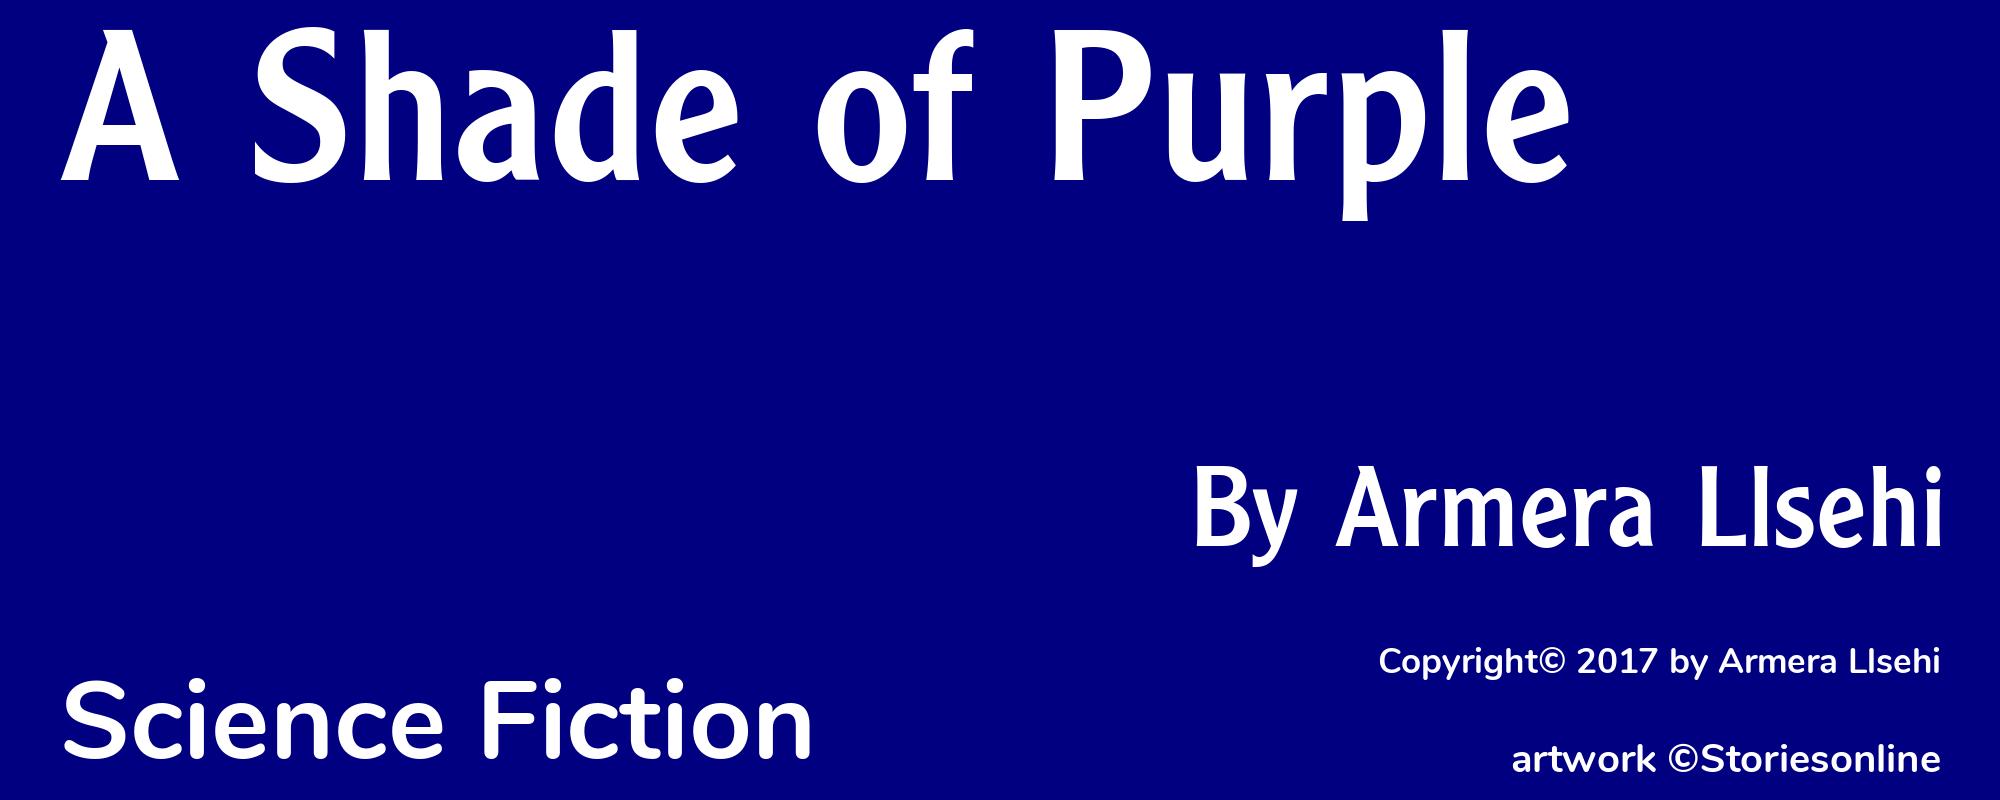 A Shade of Purple - Cover